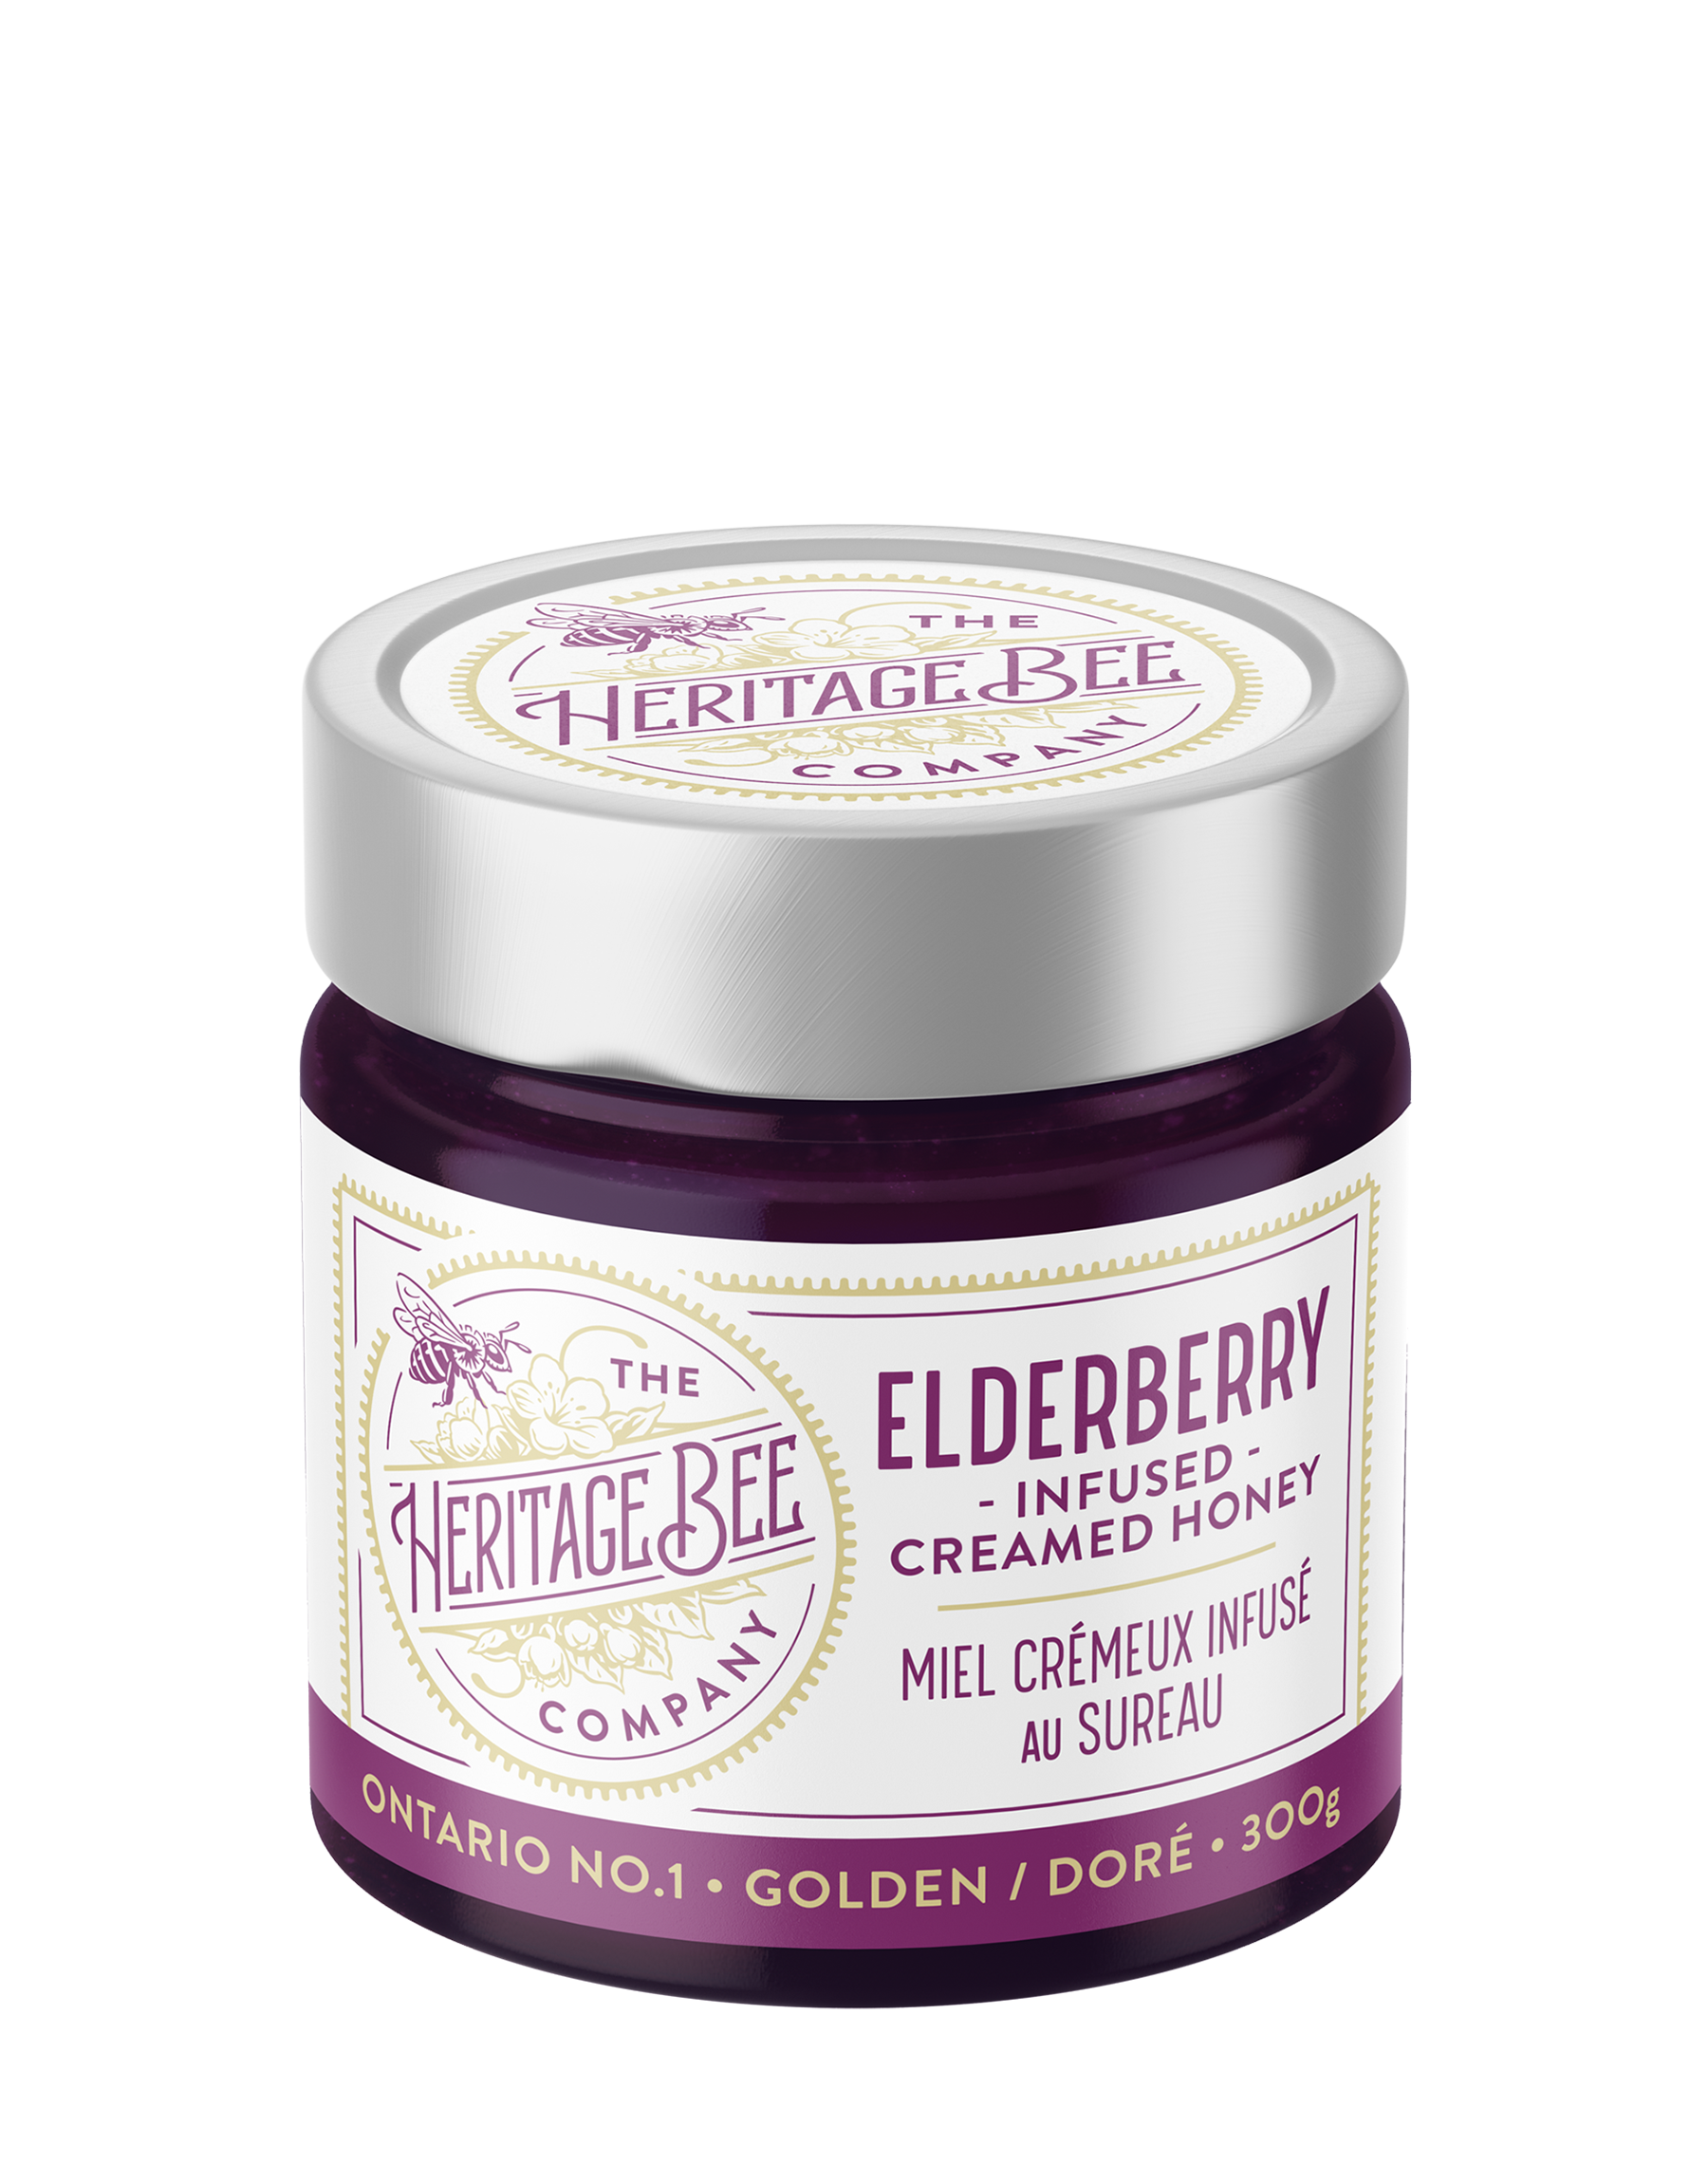 Heritage Bee Co local creamed wildflower honey infused with elderberry, a naturally antioxidant and nutrient rich plant. 100% Ontario handcrafted premium honey. 